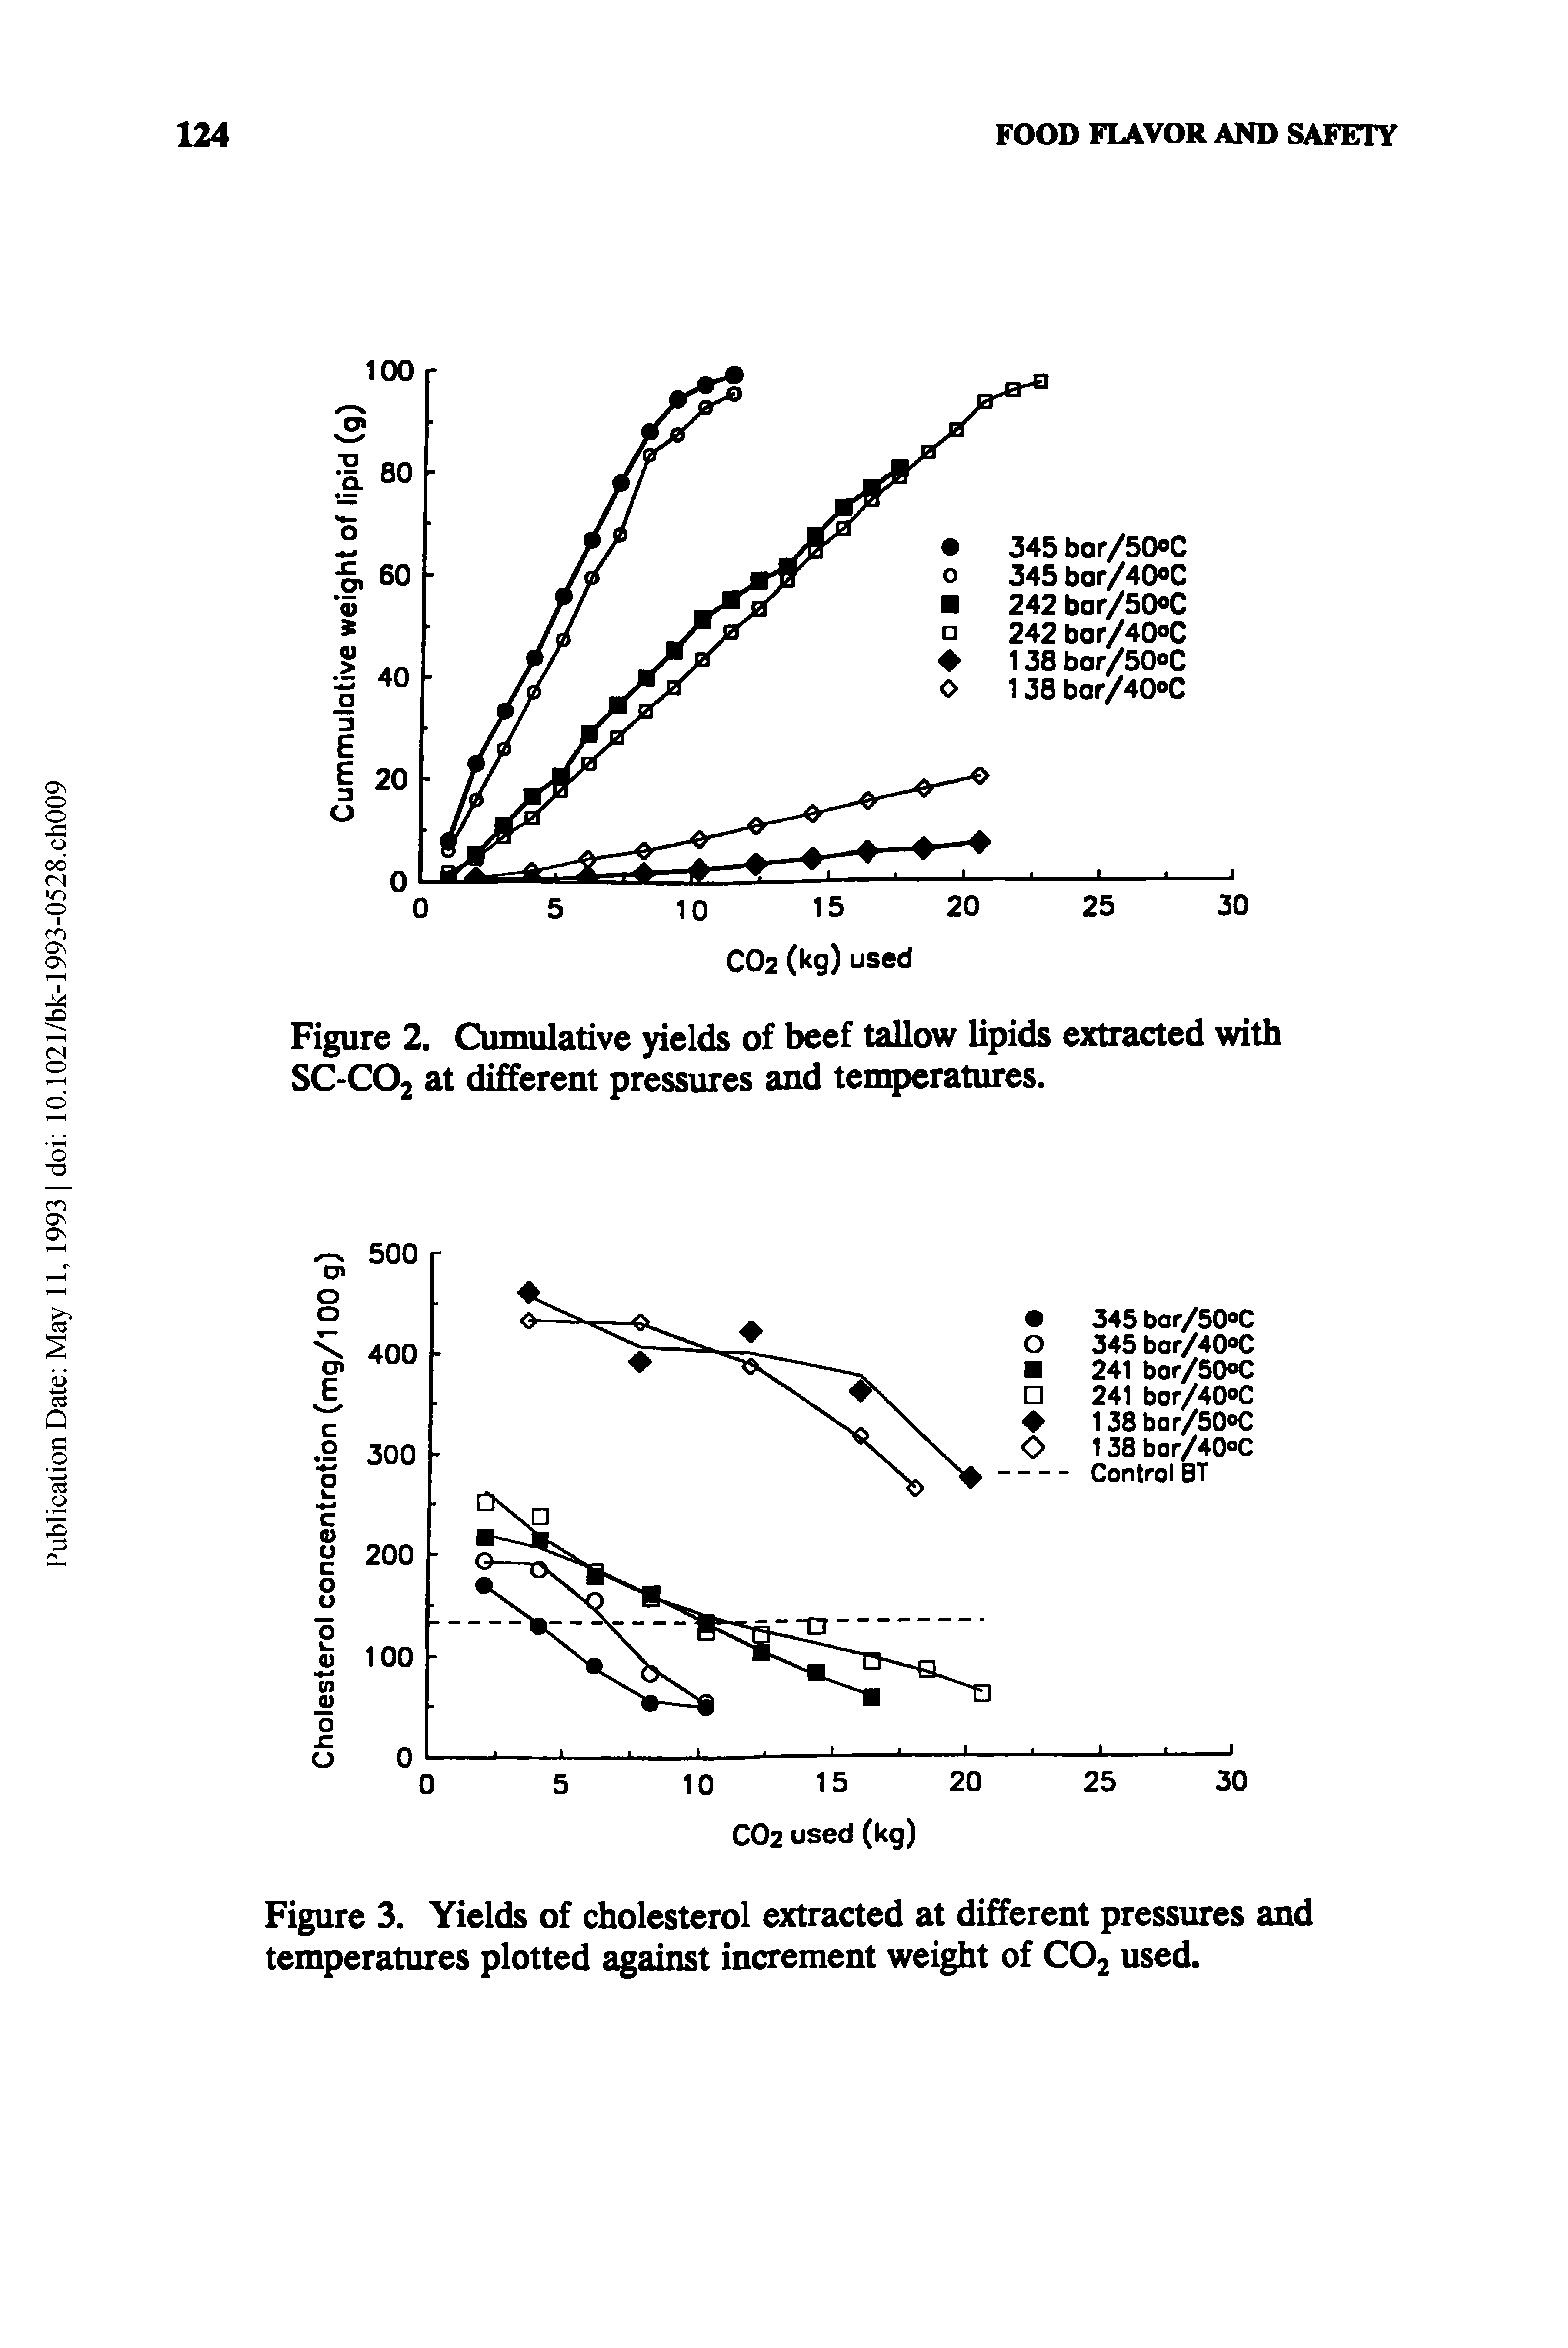 Figure 2. Cumulative yields of beef tallow lipids extracted with SC-CO2 at different pressures and temperatures.